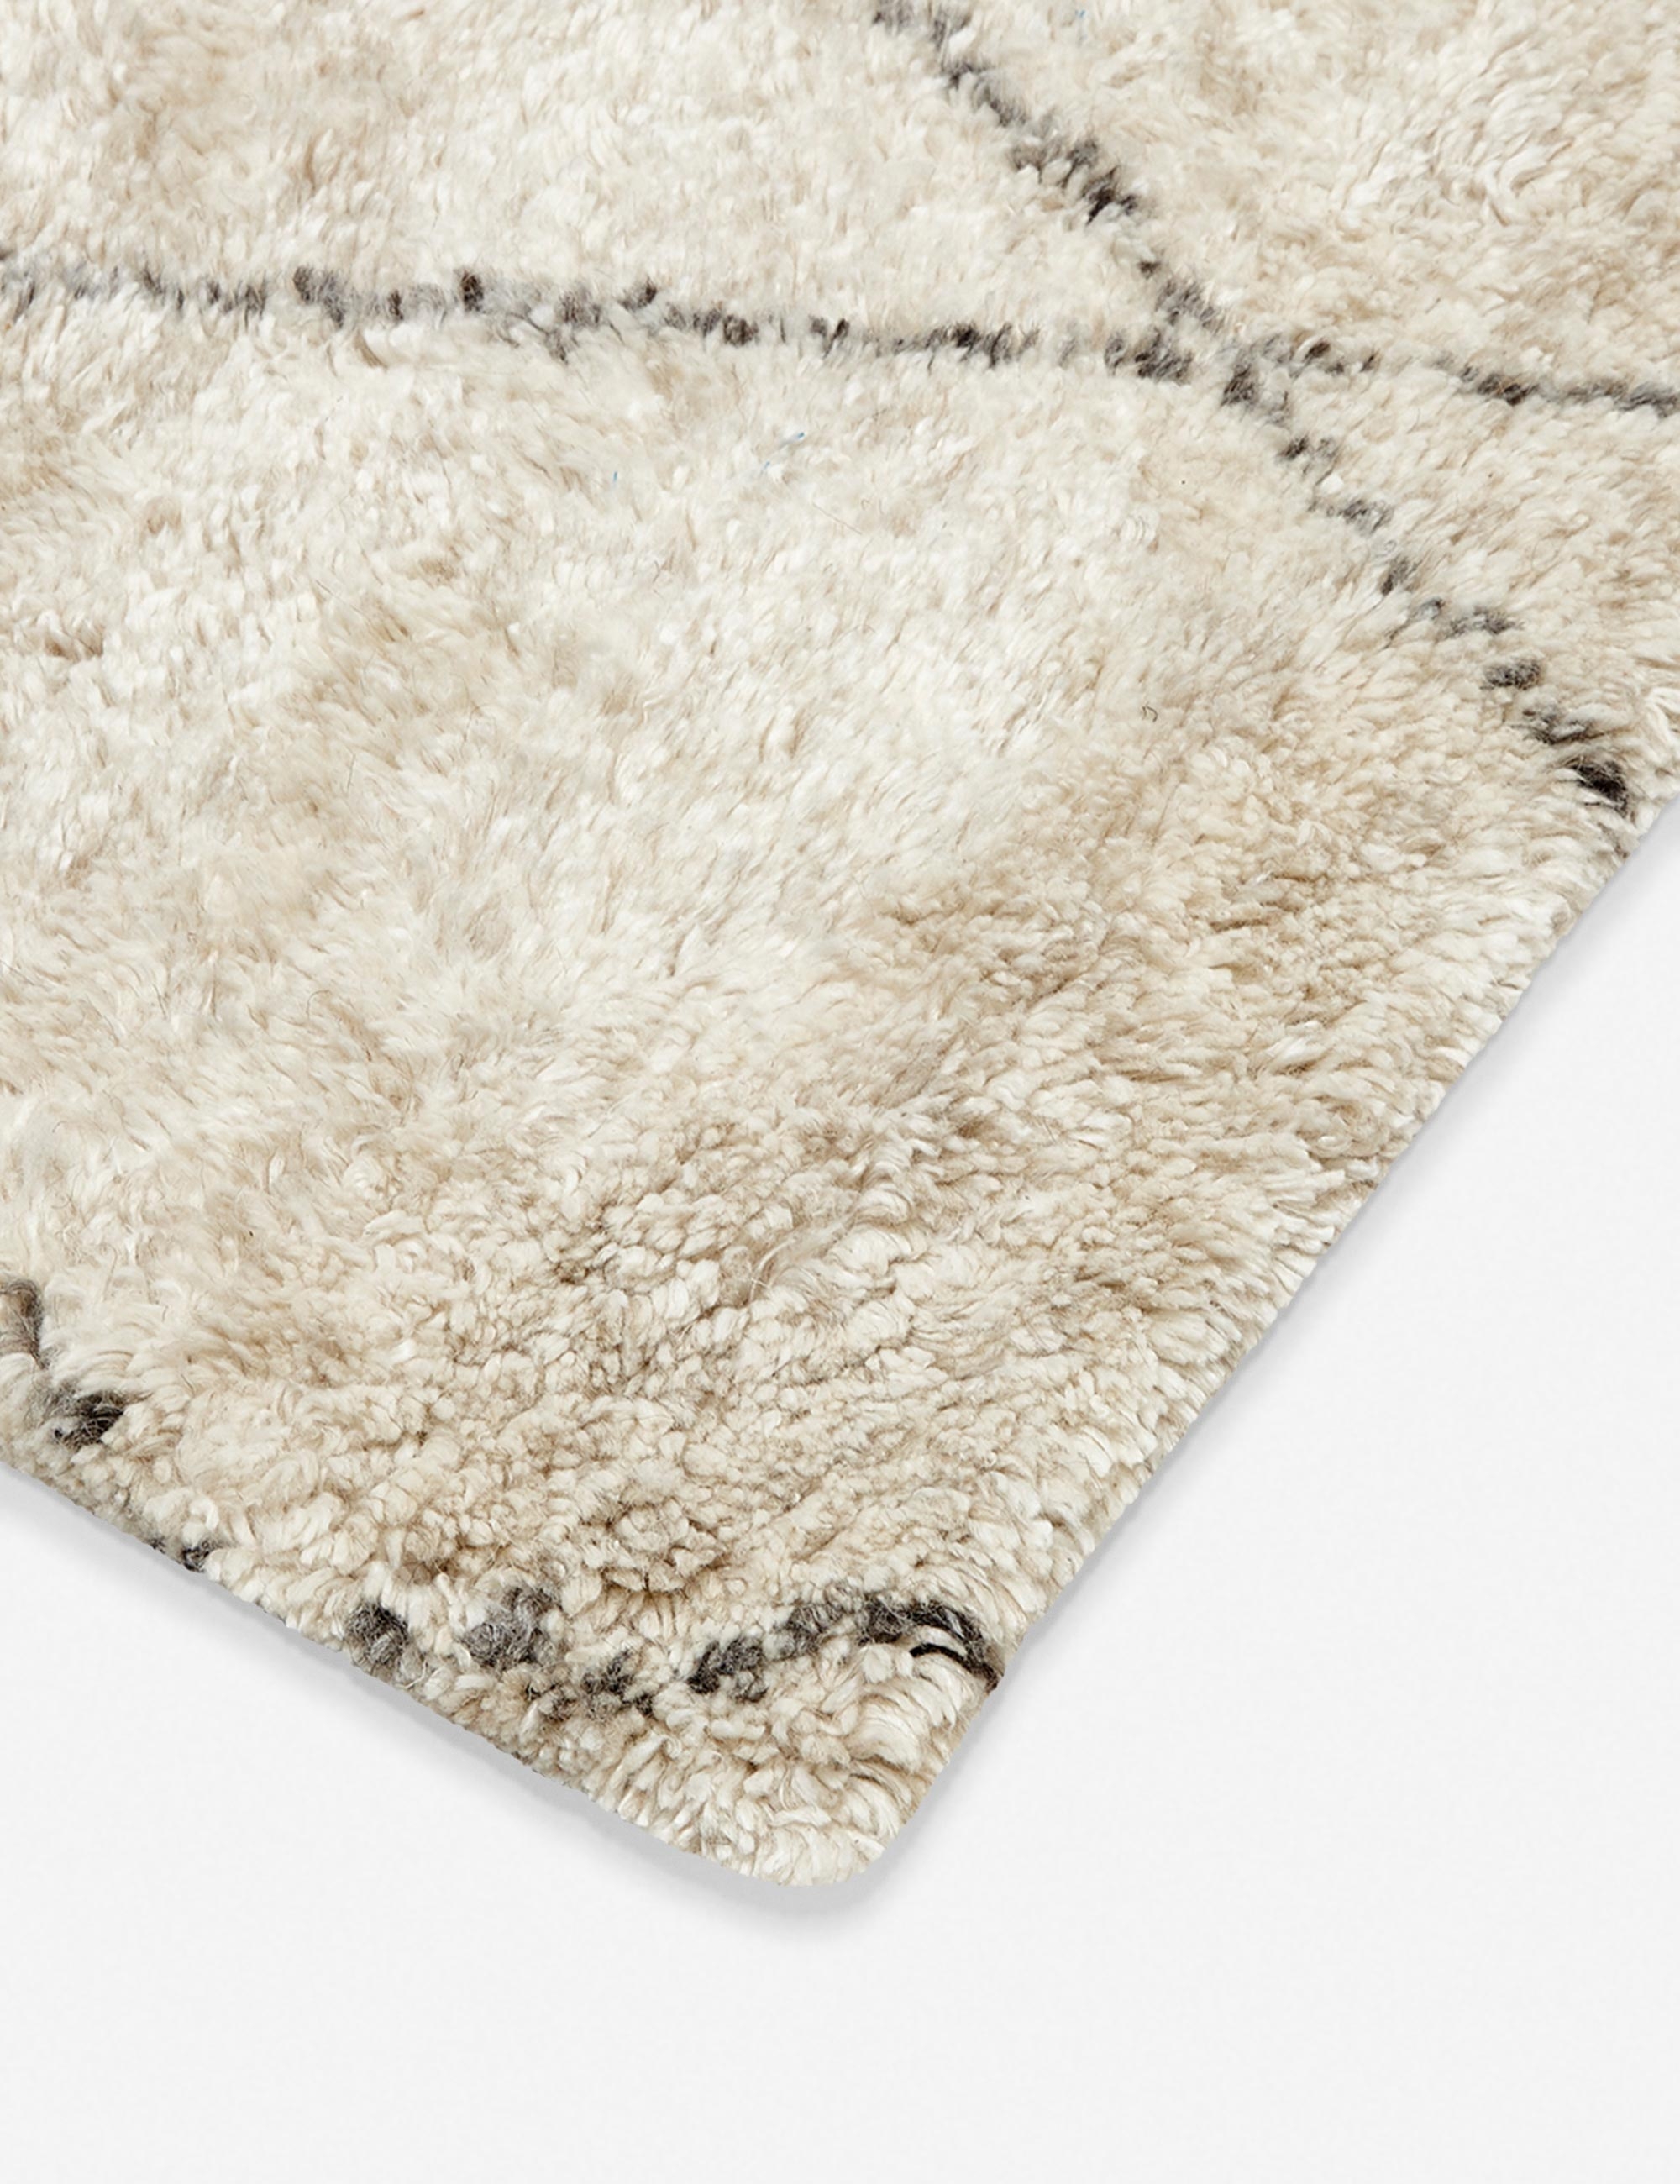 Ferra Hand-Knotted Wool-Blend Moroccan Style Shag Rug - Image 2